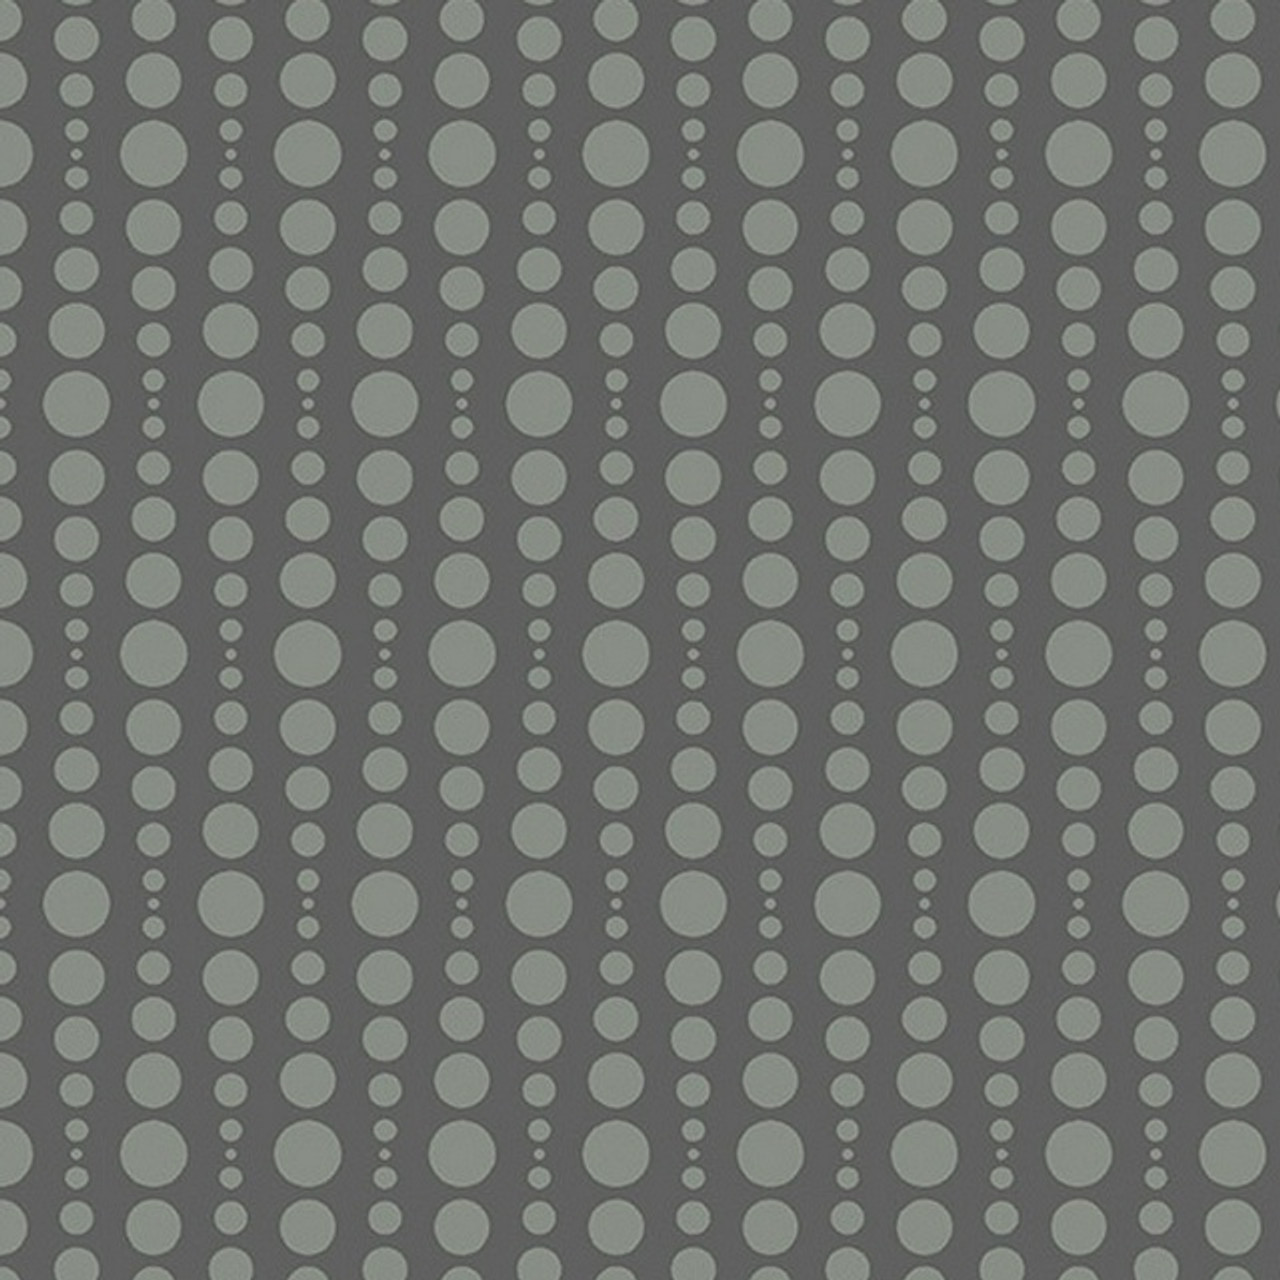 Andover Fabrics Stealth Black with Grey Dots, By-the-yard.